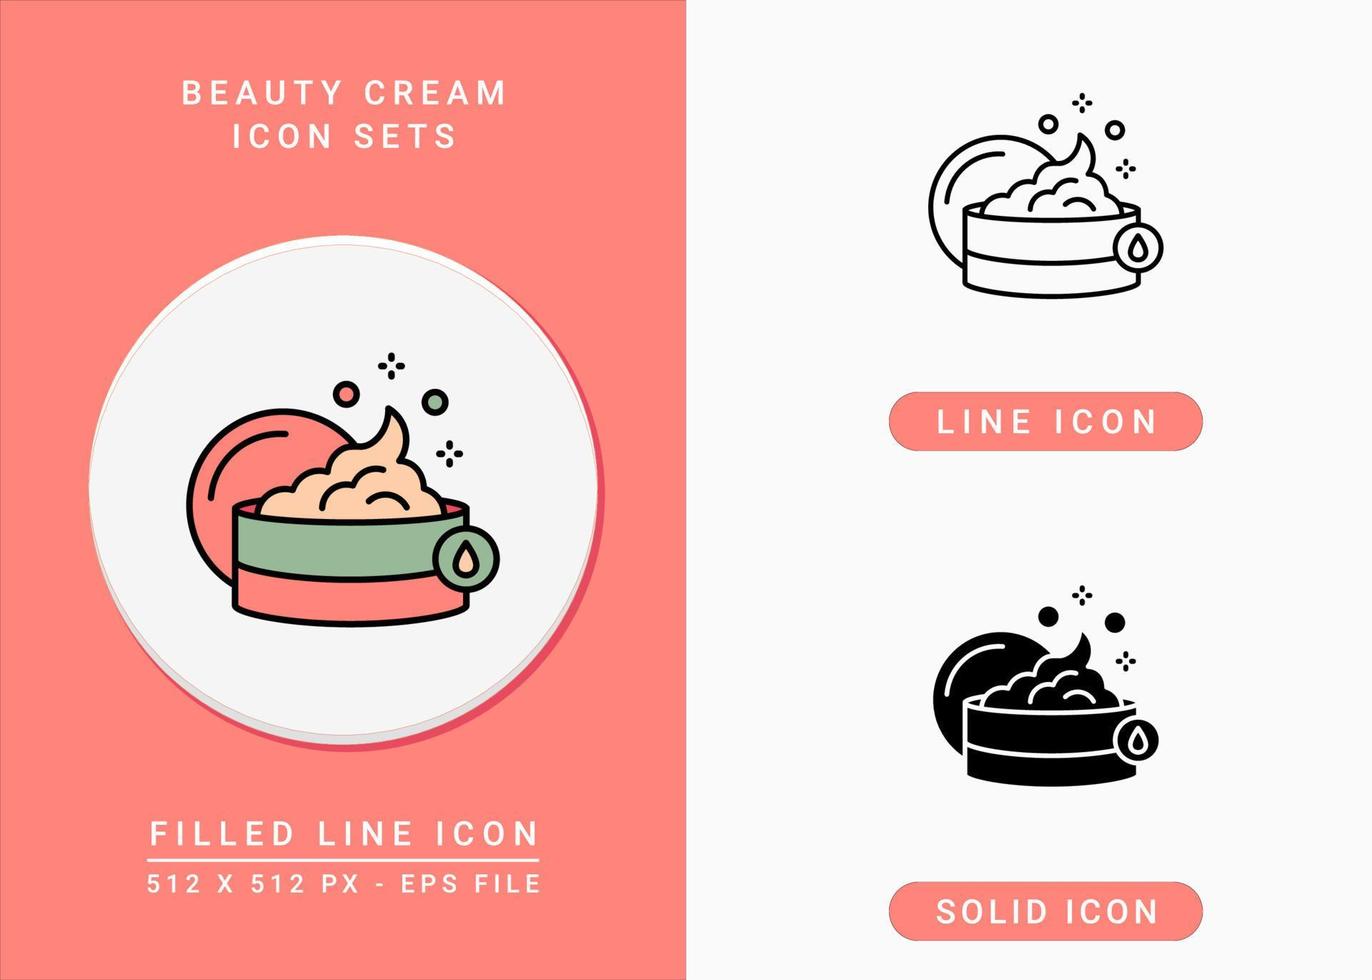 Beauty cream icons set vector illustration with solid icon line style. Moisturizer cream symbol. Editable stroke icon on isolated background for web design, infographic and UI mobile app.